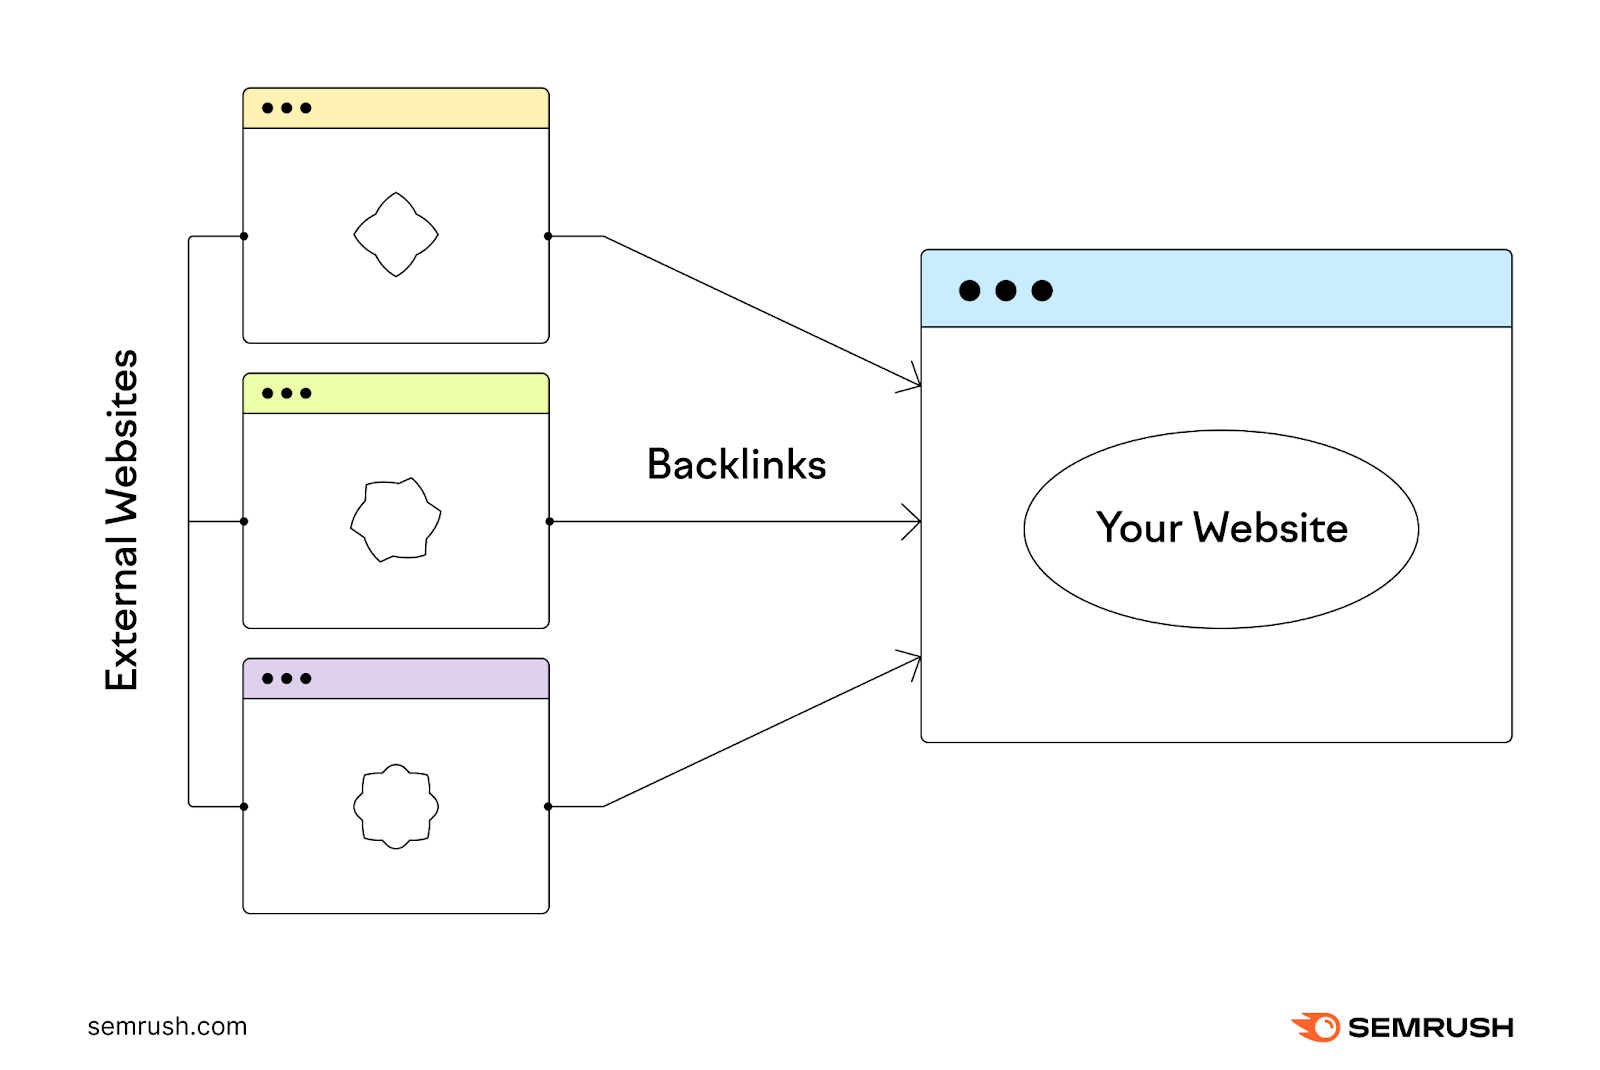 Arrows representing backlinks point from “external websites” to “your website”